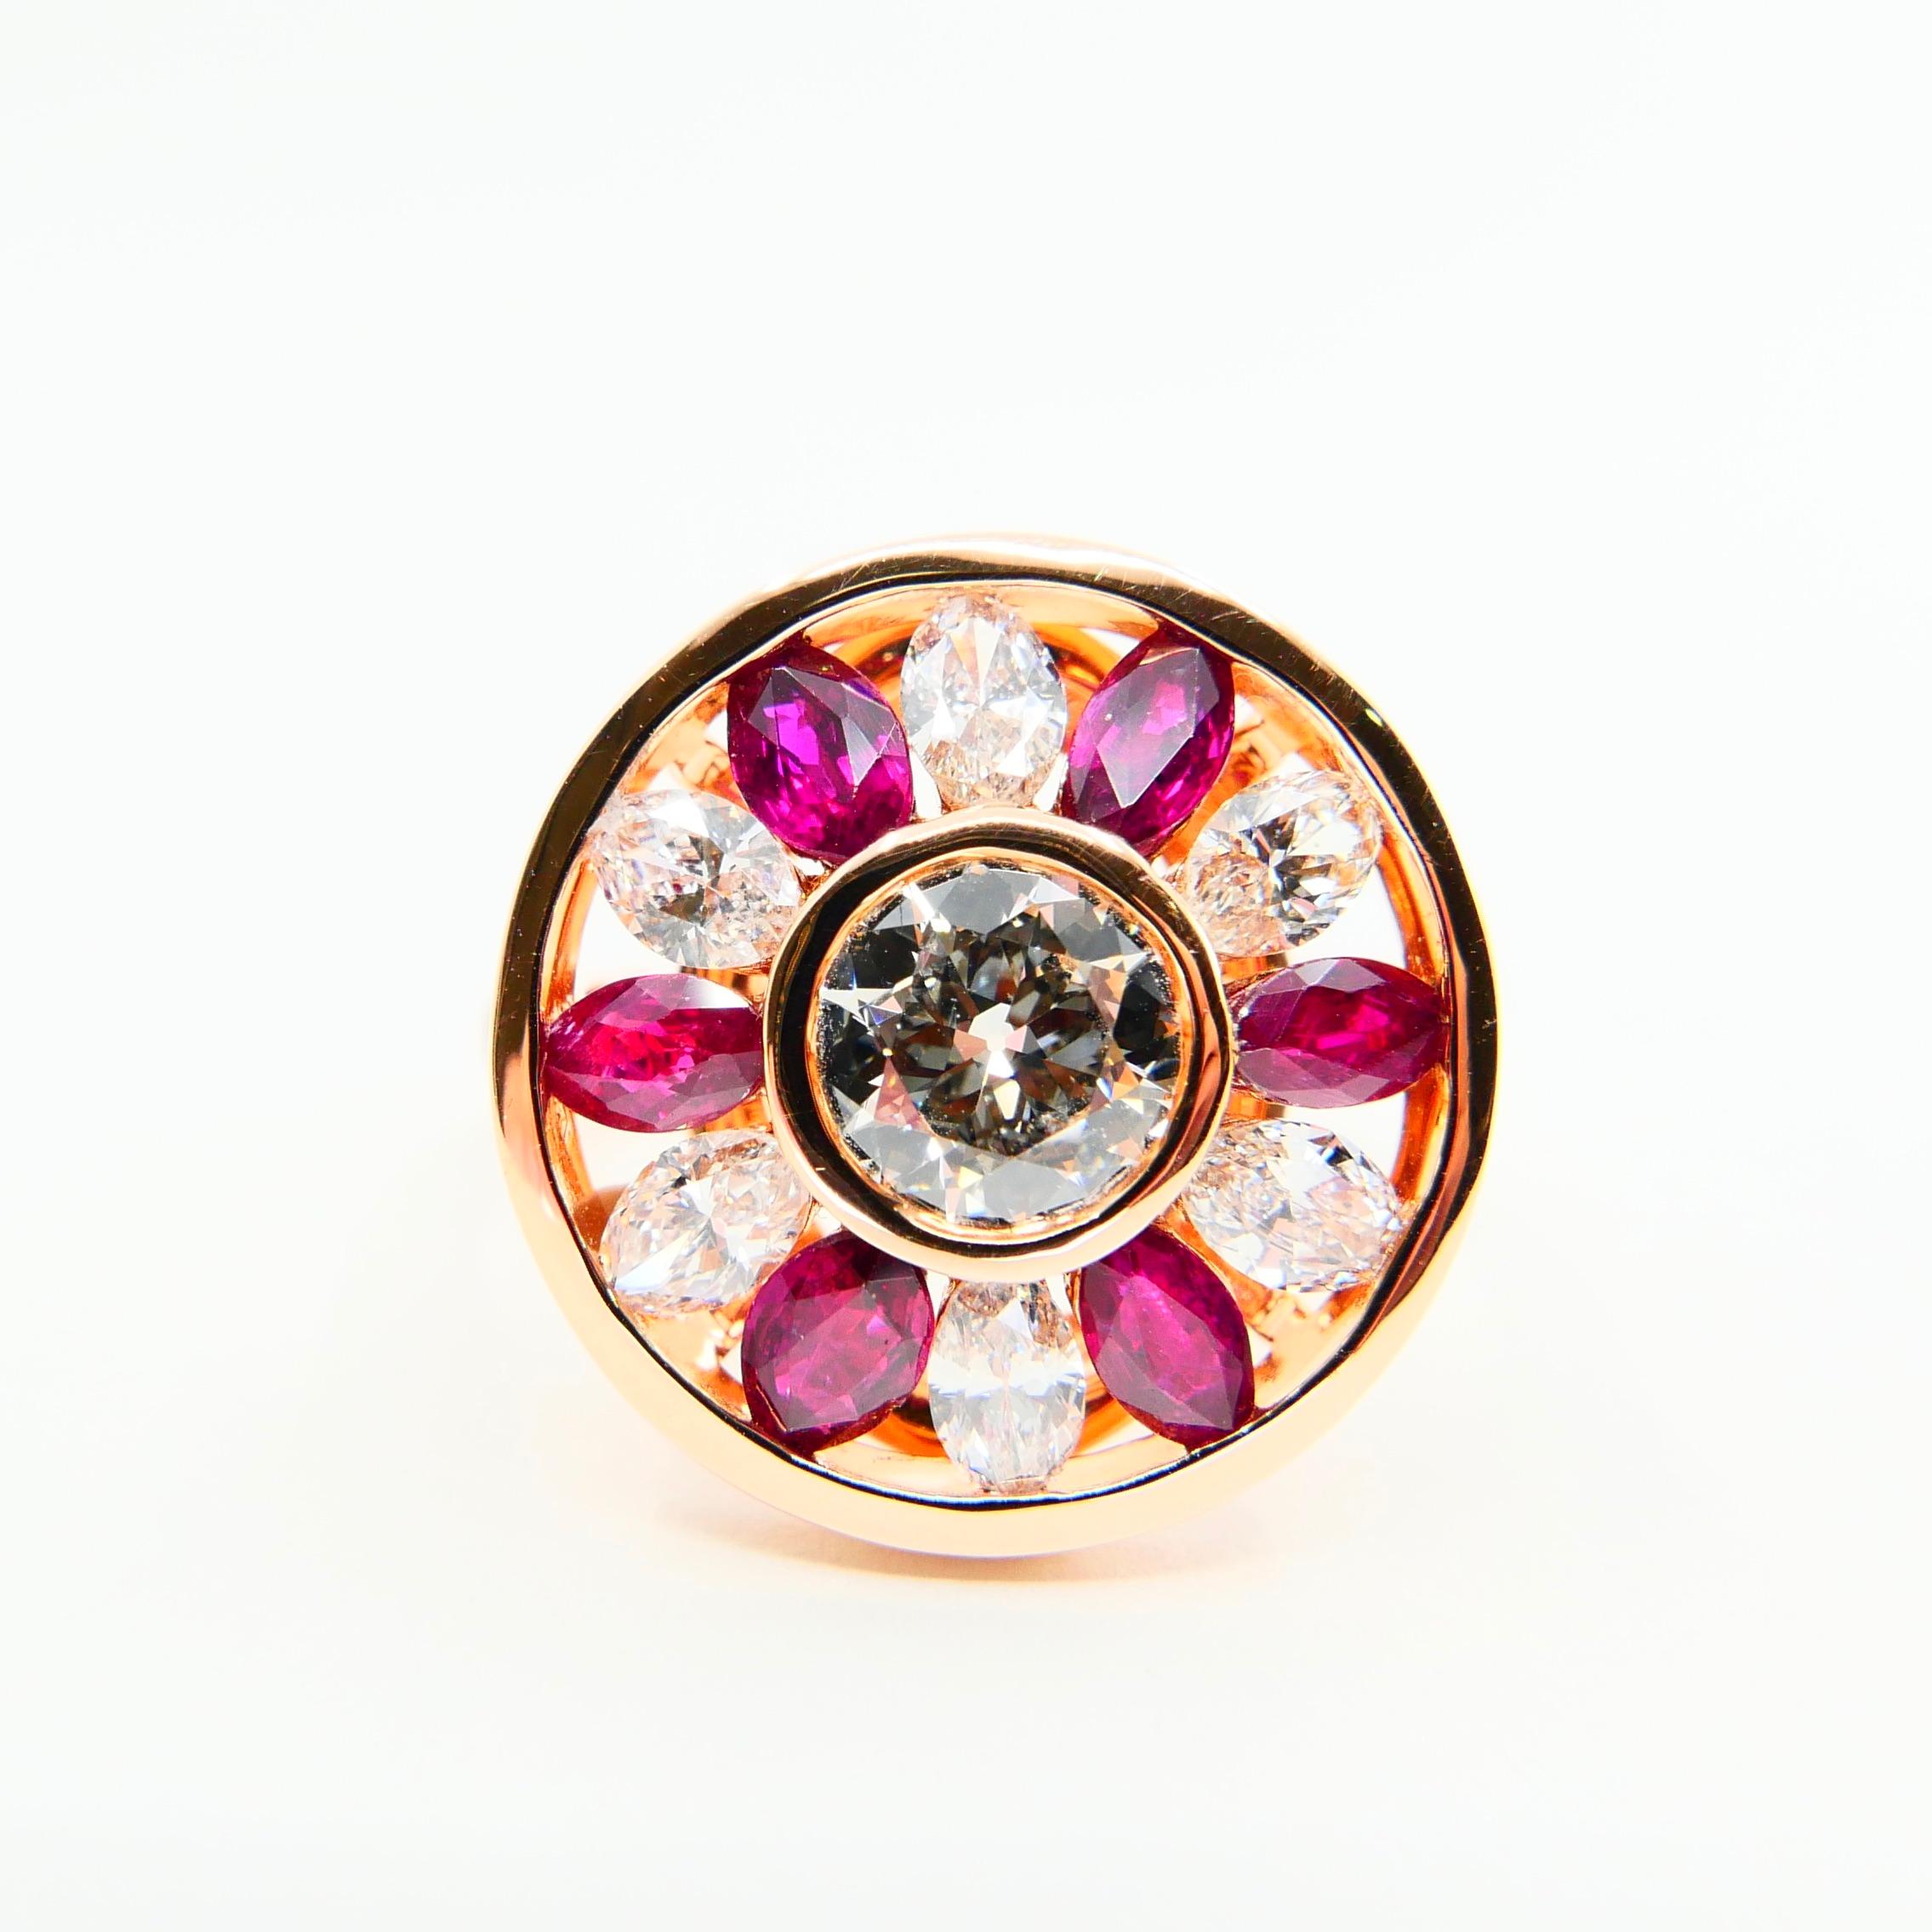 Round Cut Certified 1.53 Cts Natural Burma Ruby & Old Cut Diamond Ring, 18K Rose Gold